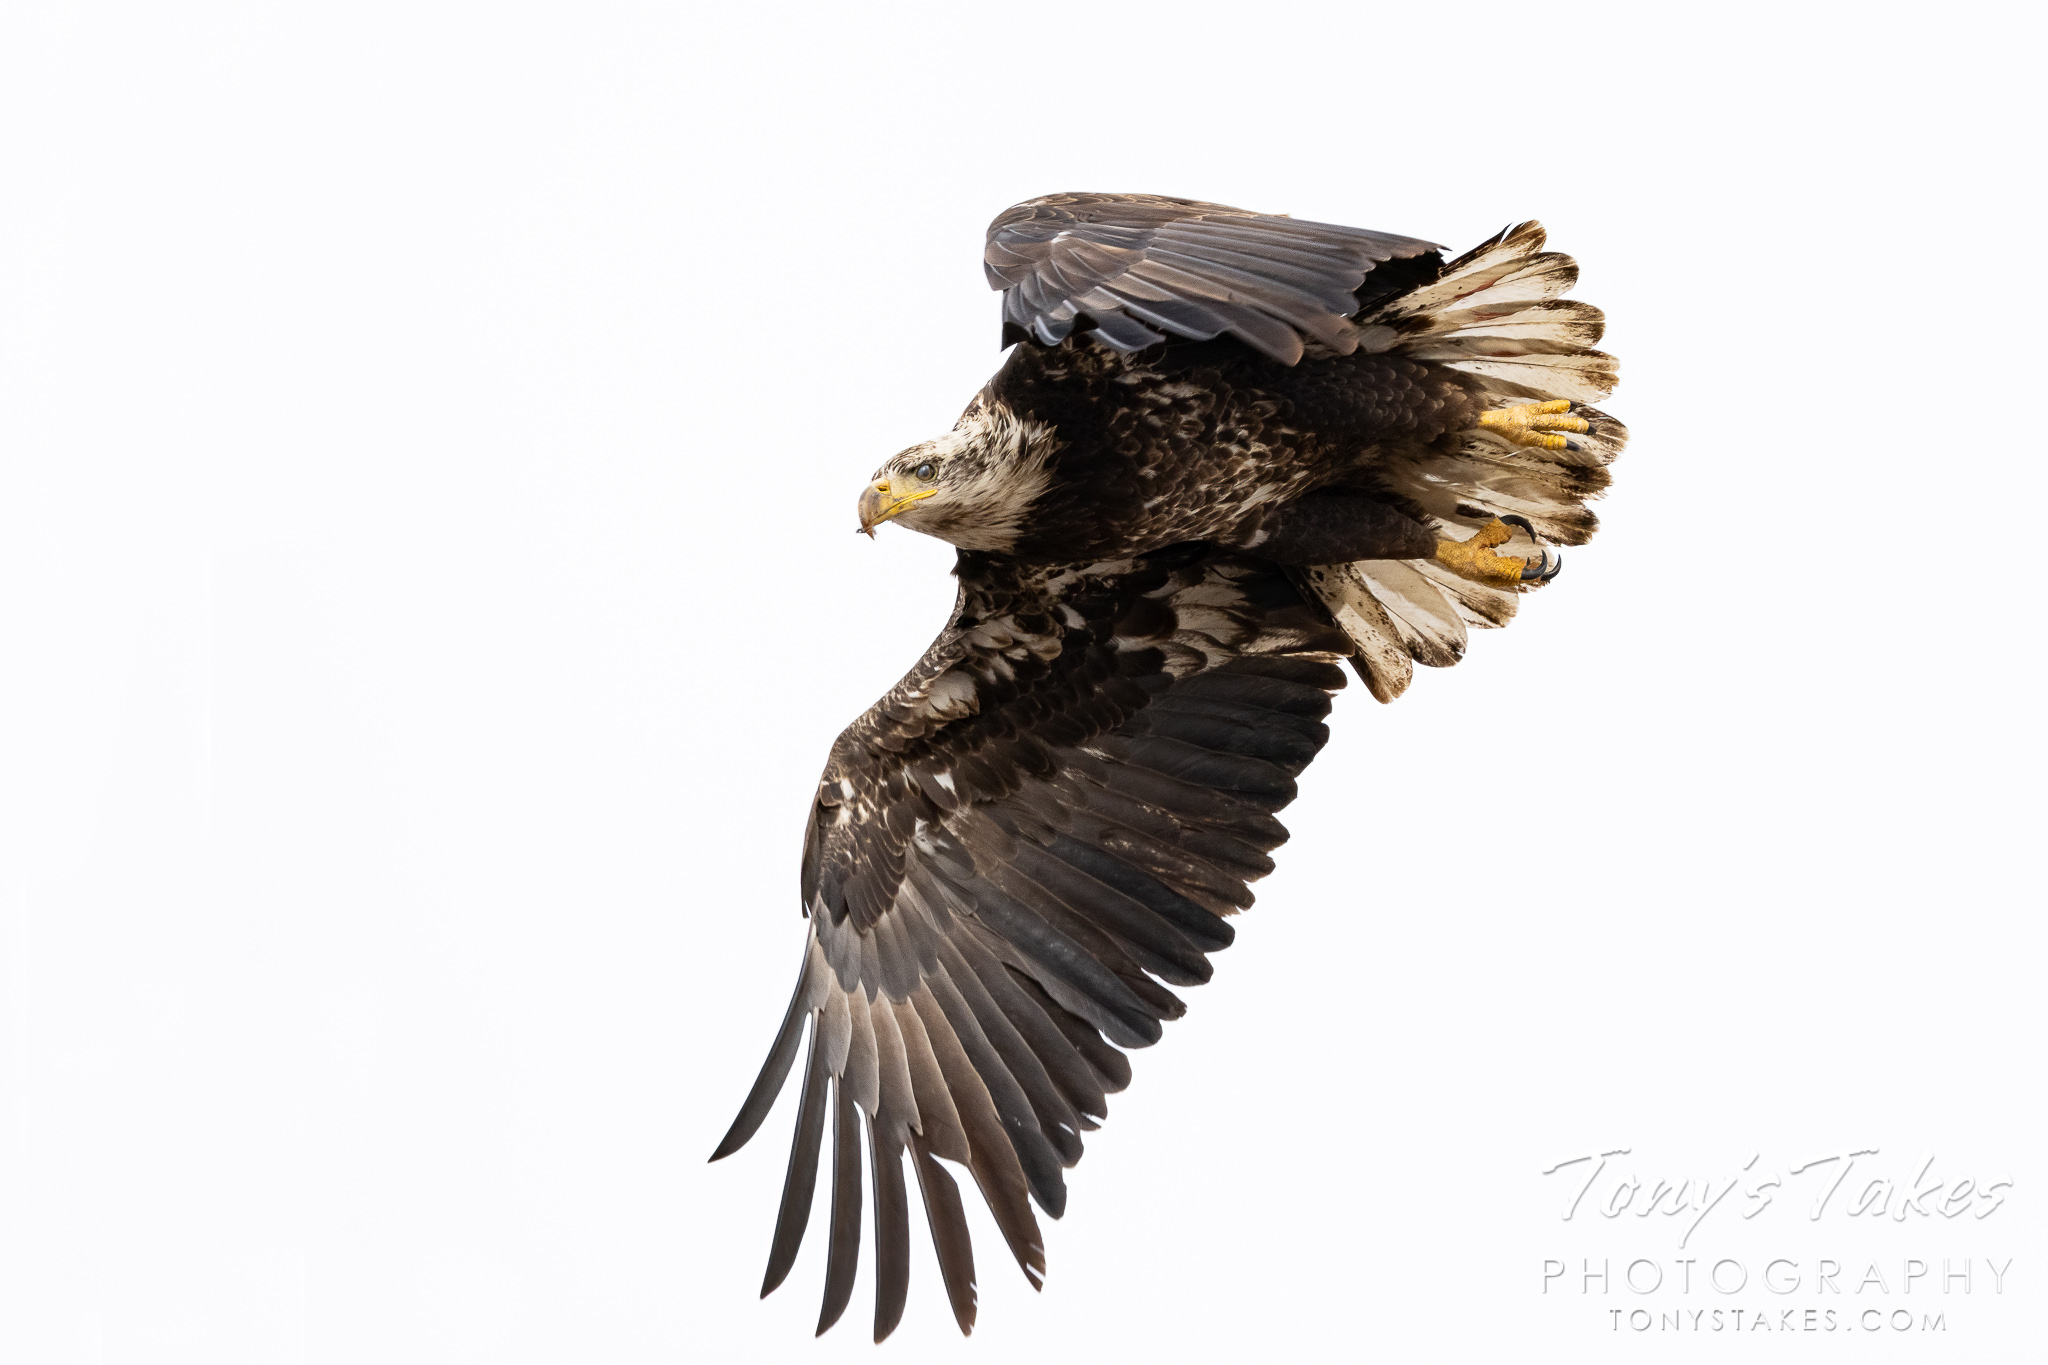 Young bald eagle takes flight for Freedom Friday